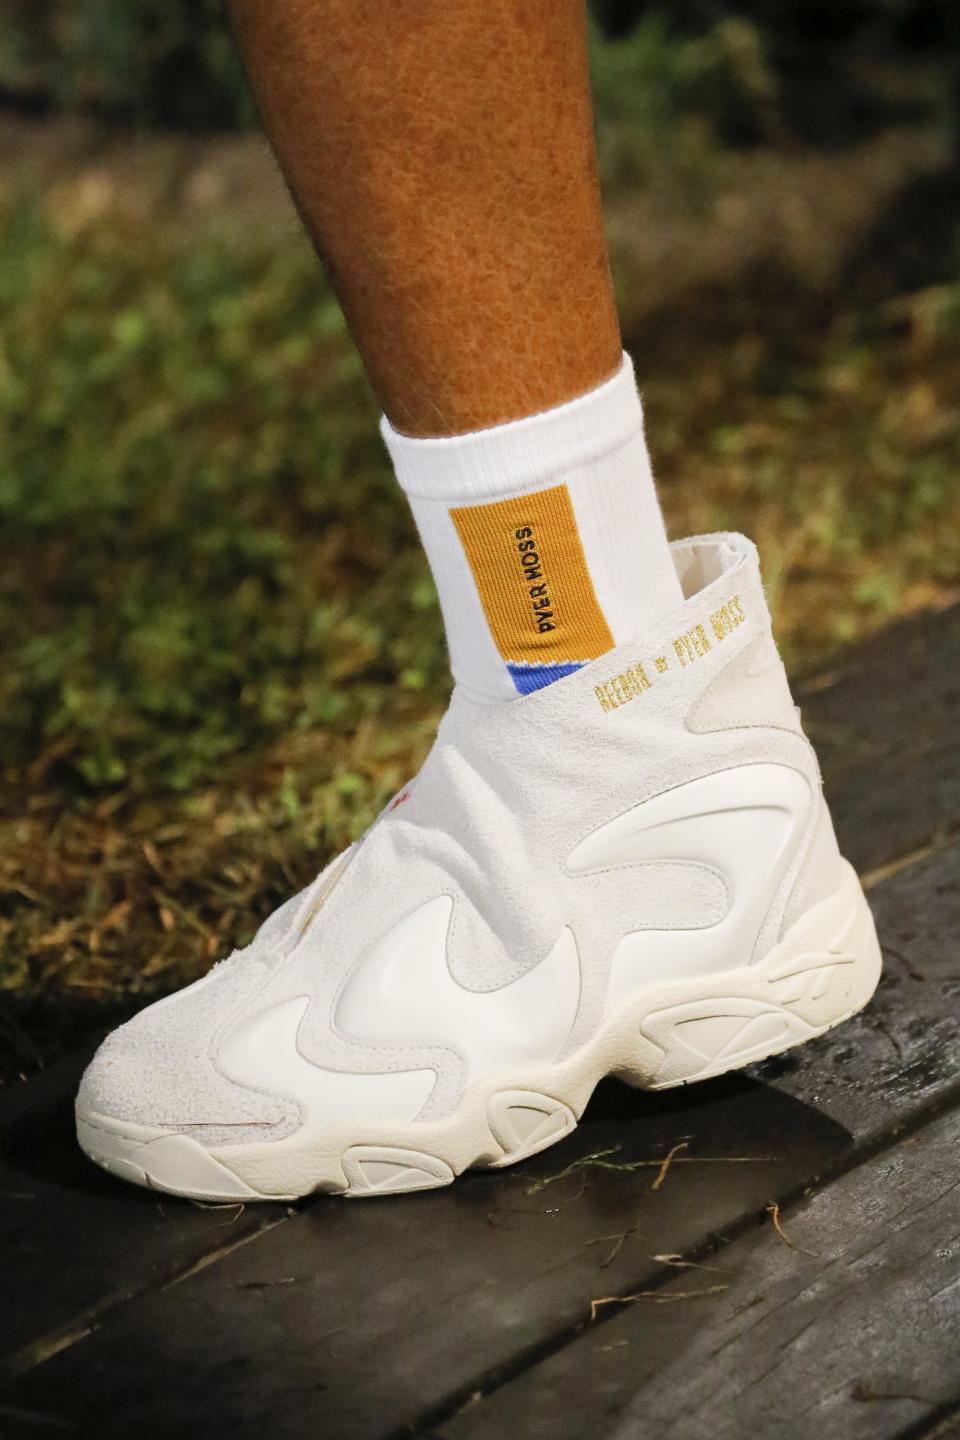 From the Balenciaga Track Trainer to the Prada Cloudbust, theses are the sneakers we'll always think of as "so 2018."